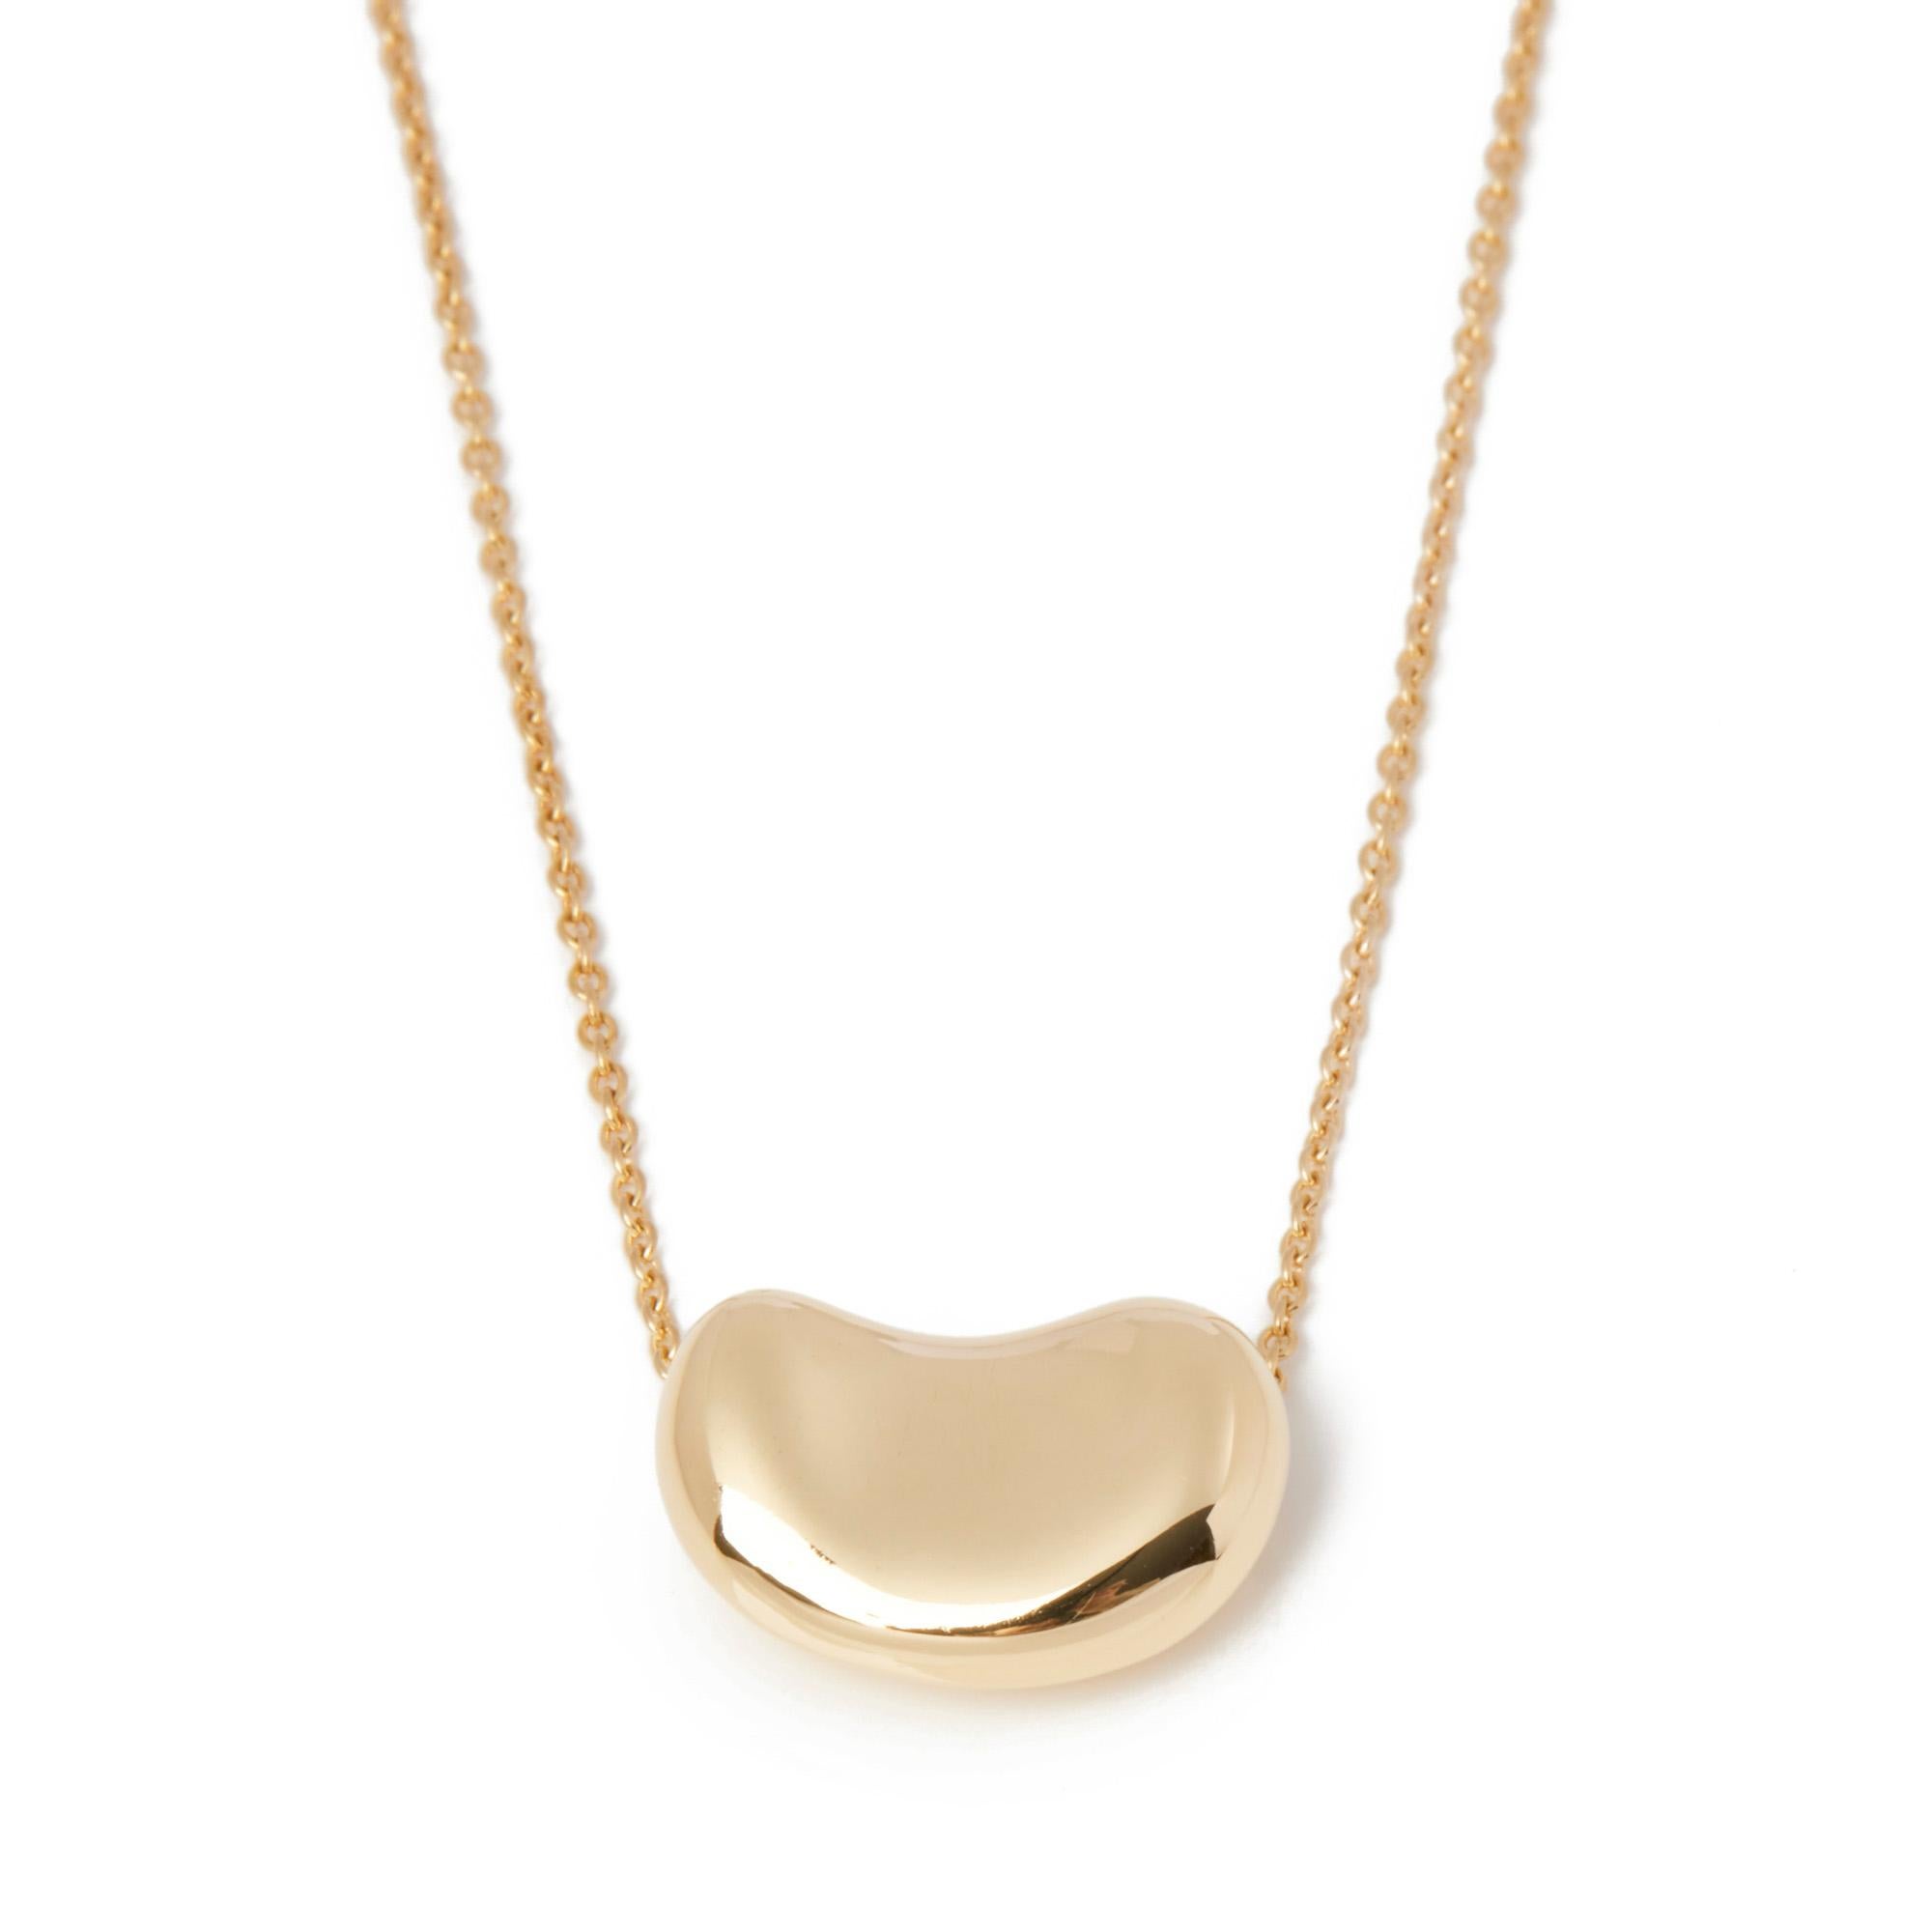 This pendant by Tiffany & Co is from their Elsa Peretti collection and features an 15mm 18ct yellow gold bean set on a 42cm trace chain. Accompanied by a Xupes presentation box. Our Xupes reference is J875 should you need to quote this.

ITEM